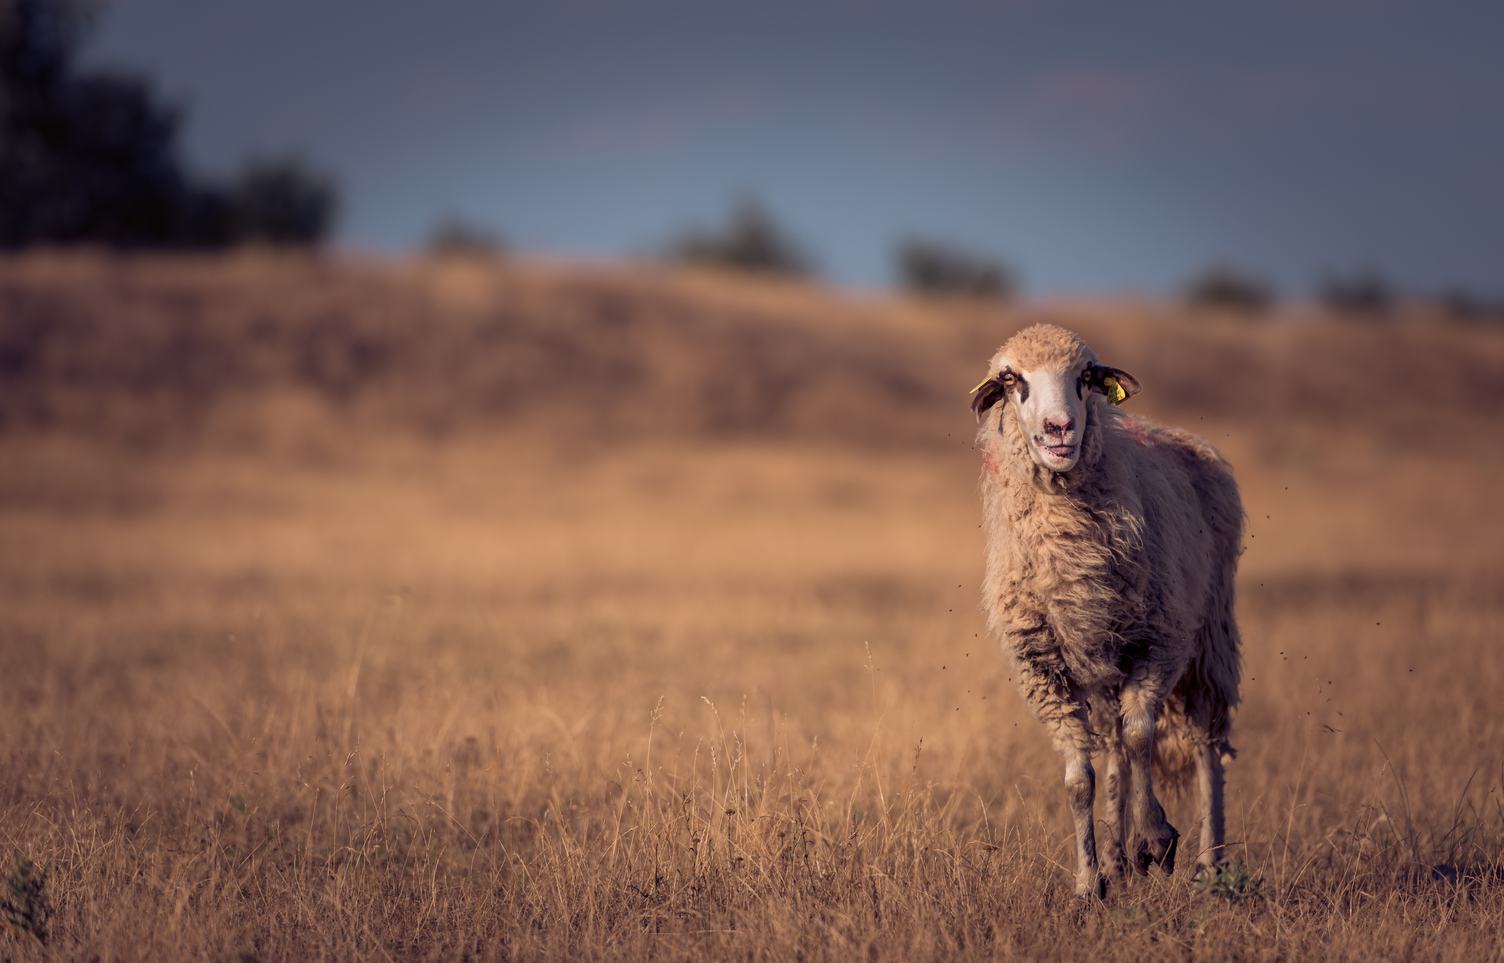 Single Sheep on a Dry Pasture